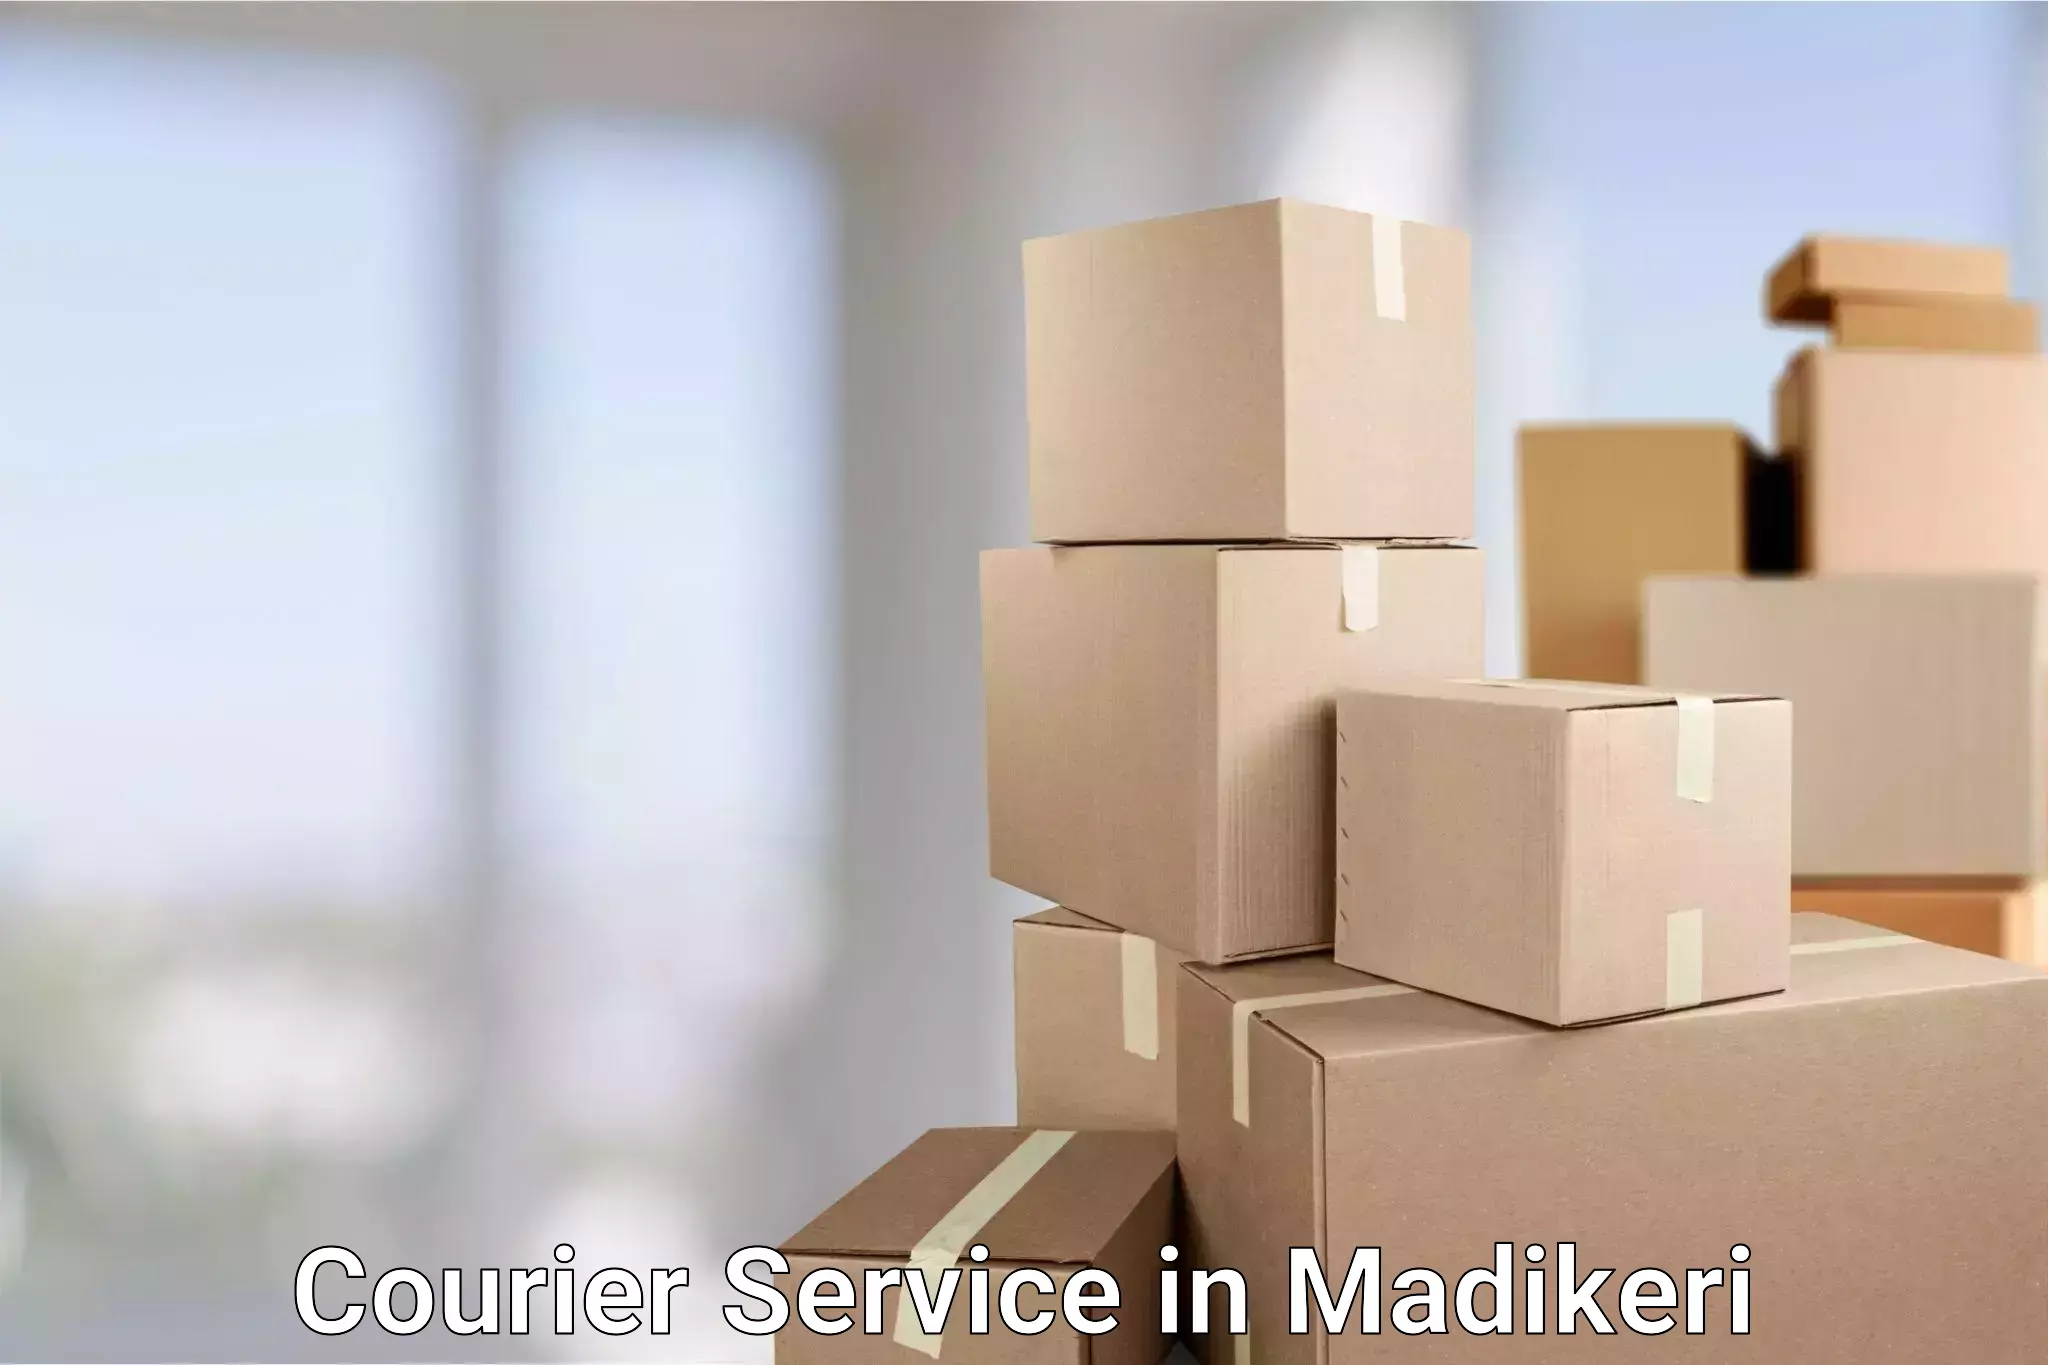 Nationwide delivery network in Madikeri